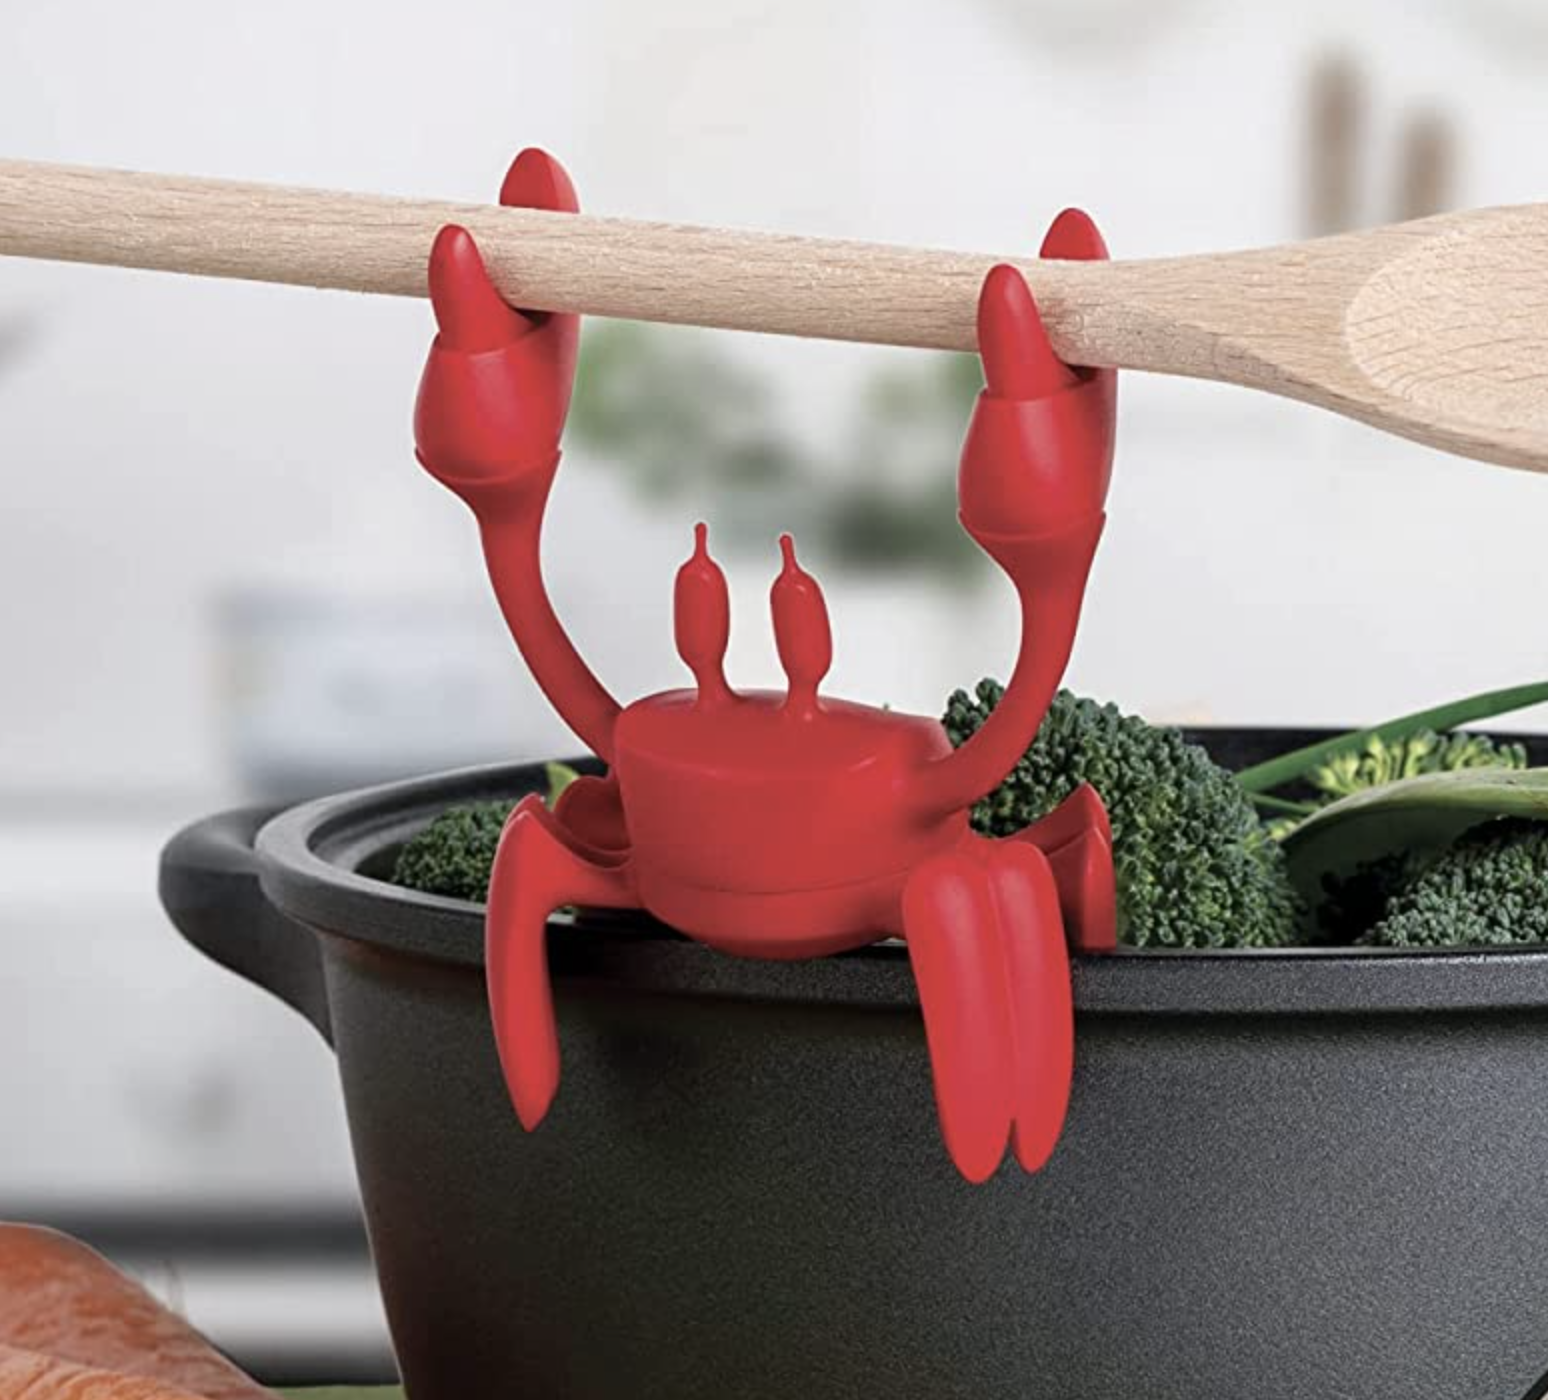 the crab spoon rest on the side of a pot holding a wooden spoon